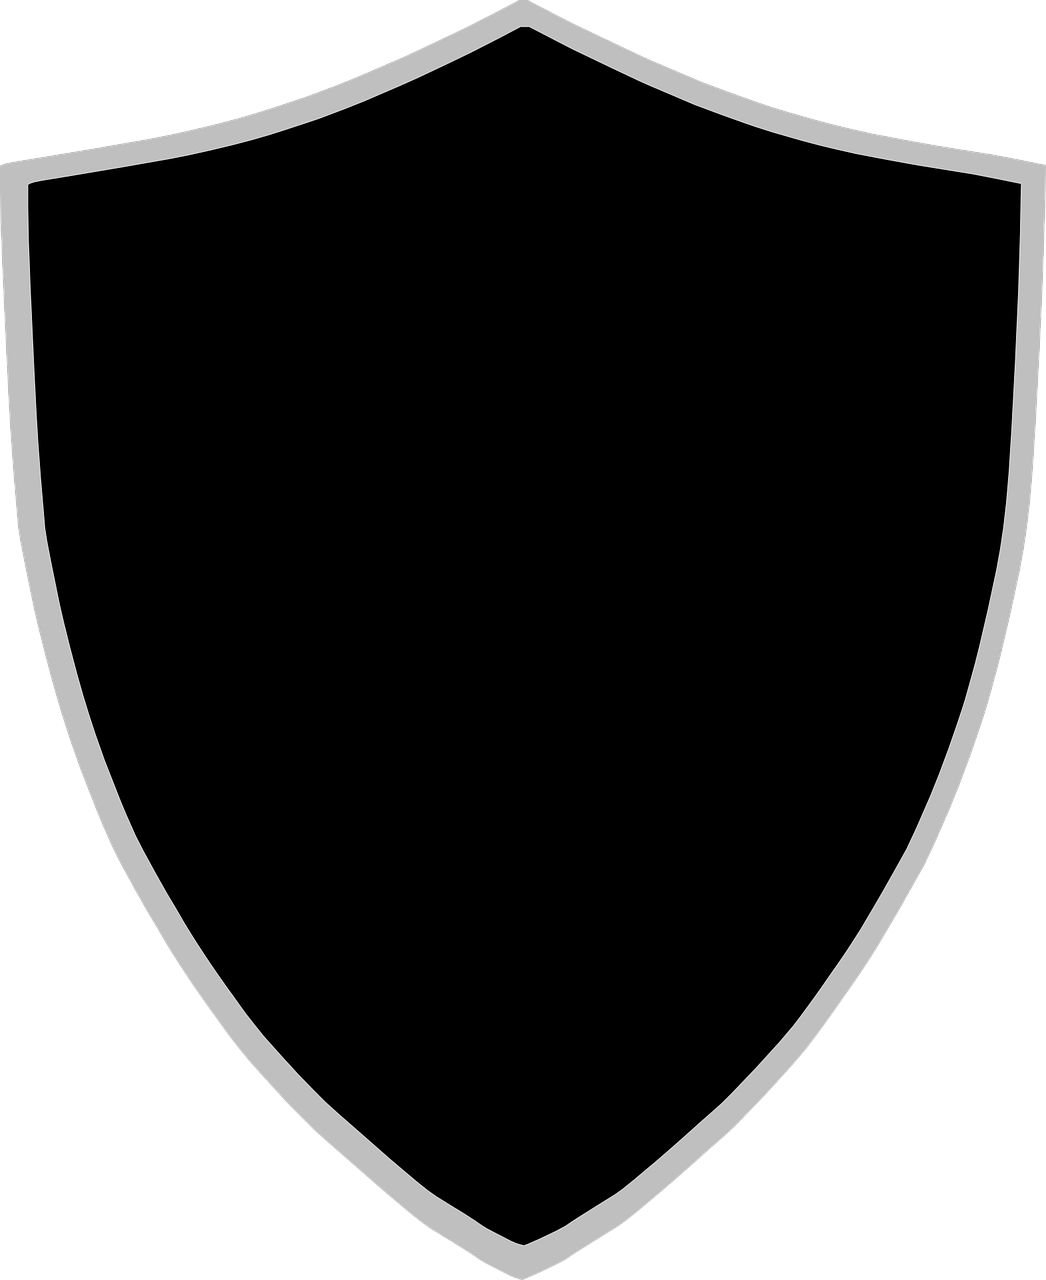 shield, sign, protection-305224.jpg